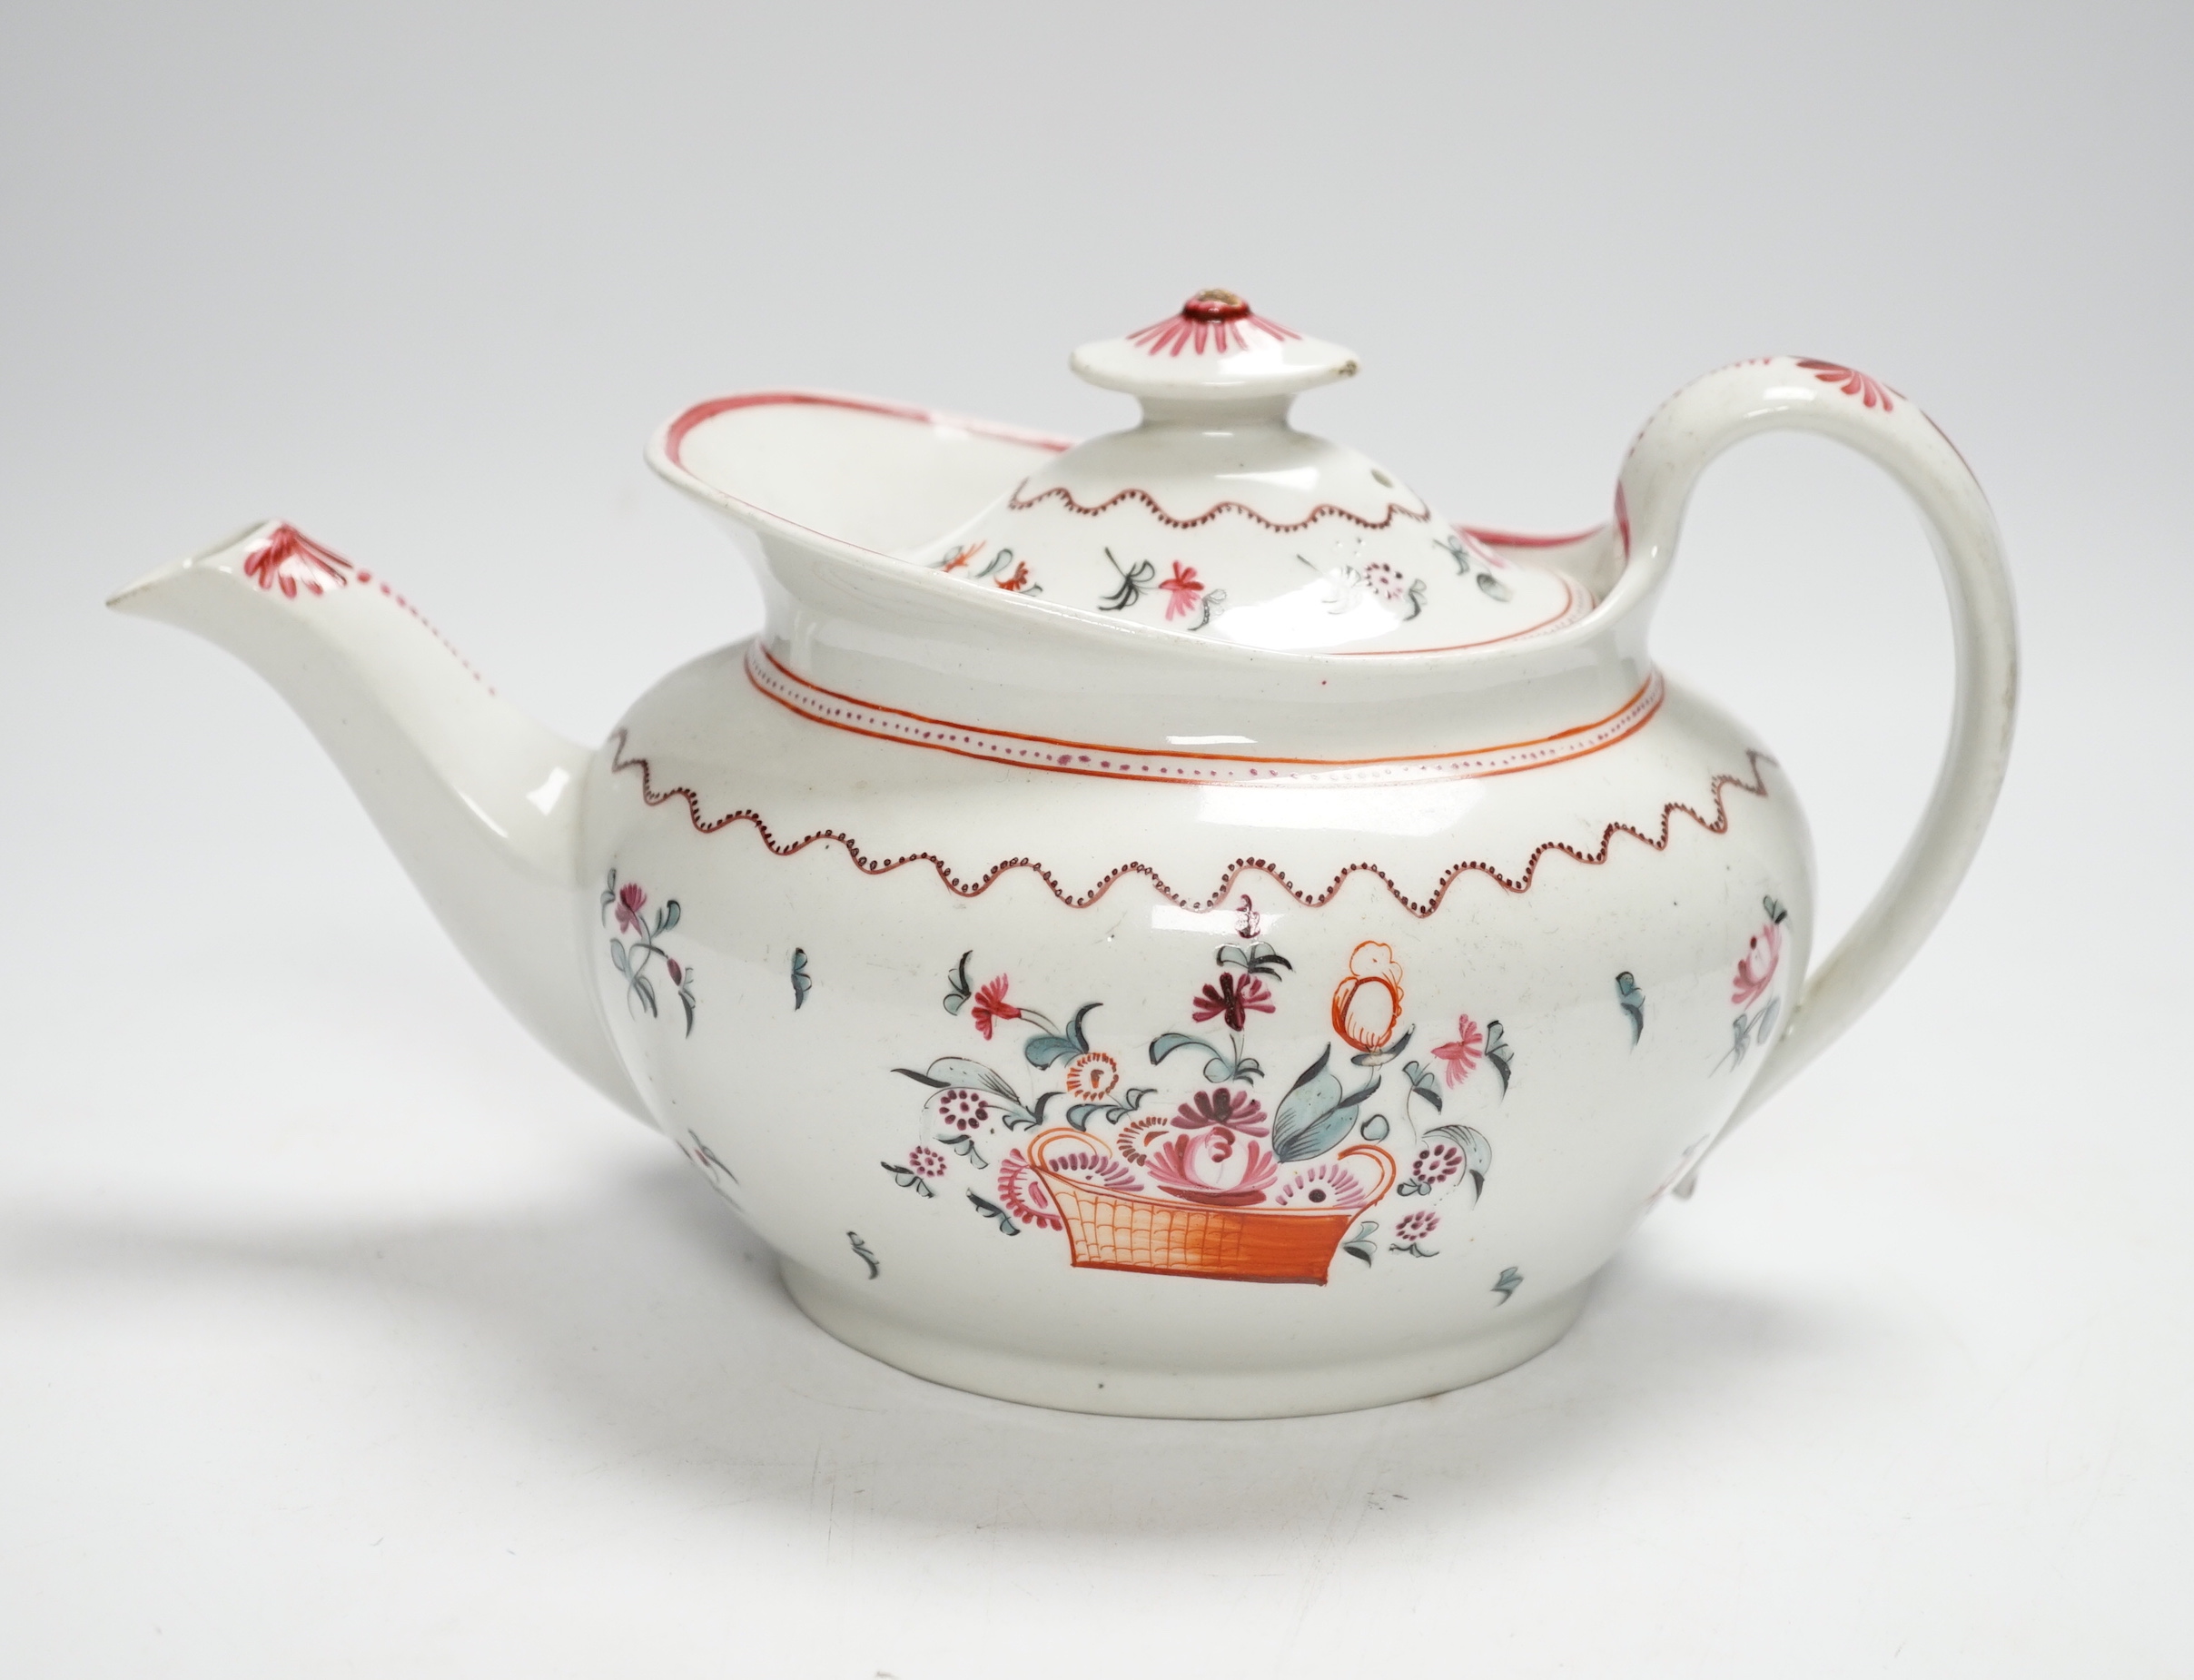 A Newhall porcelain boat shaped teapot, c.1800 with floral decoration, 25cm wide